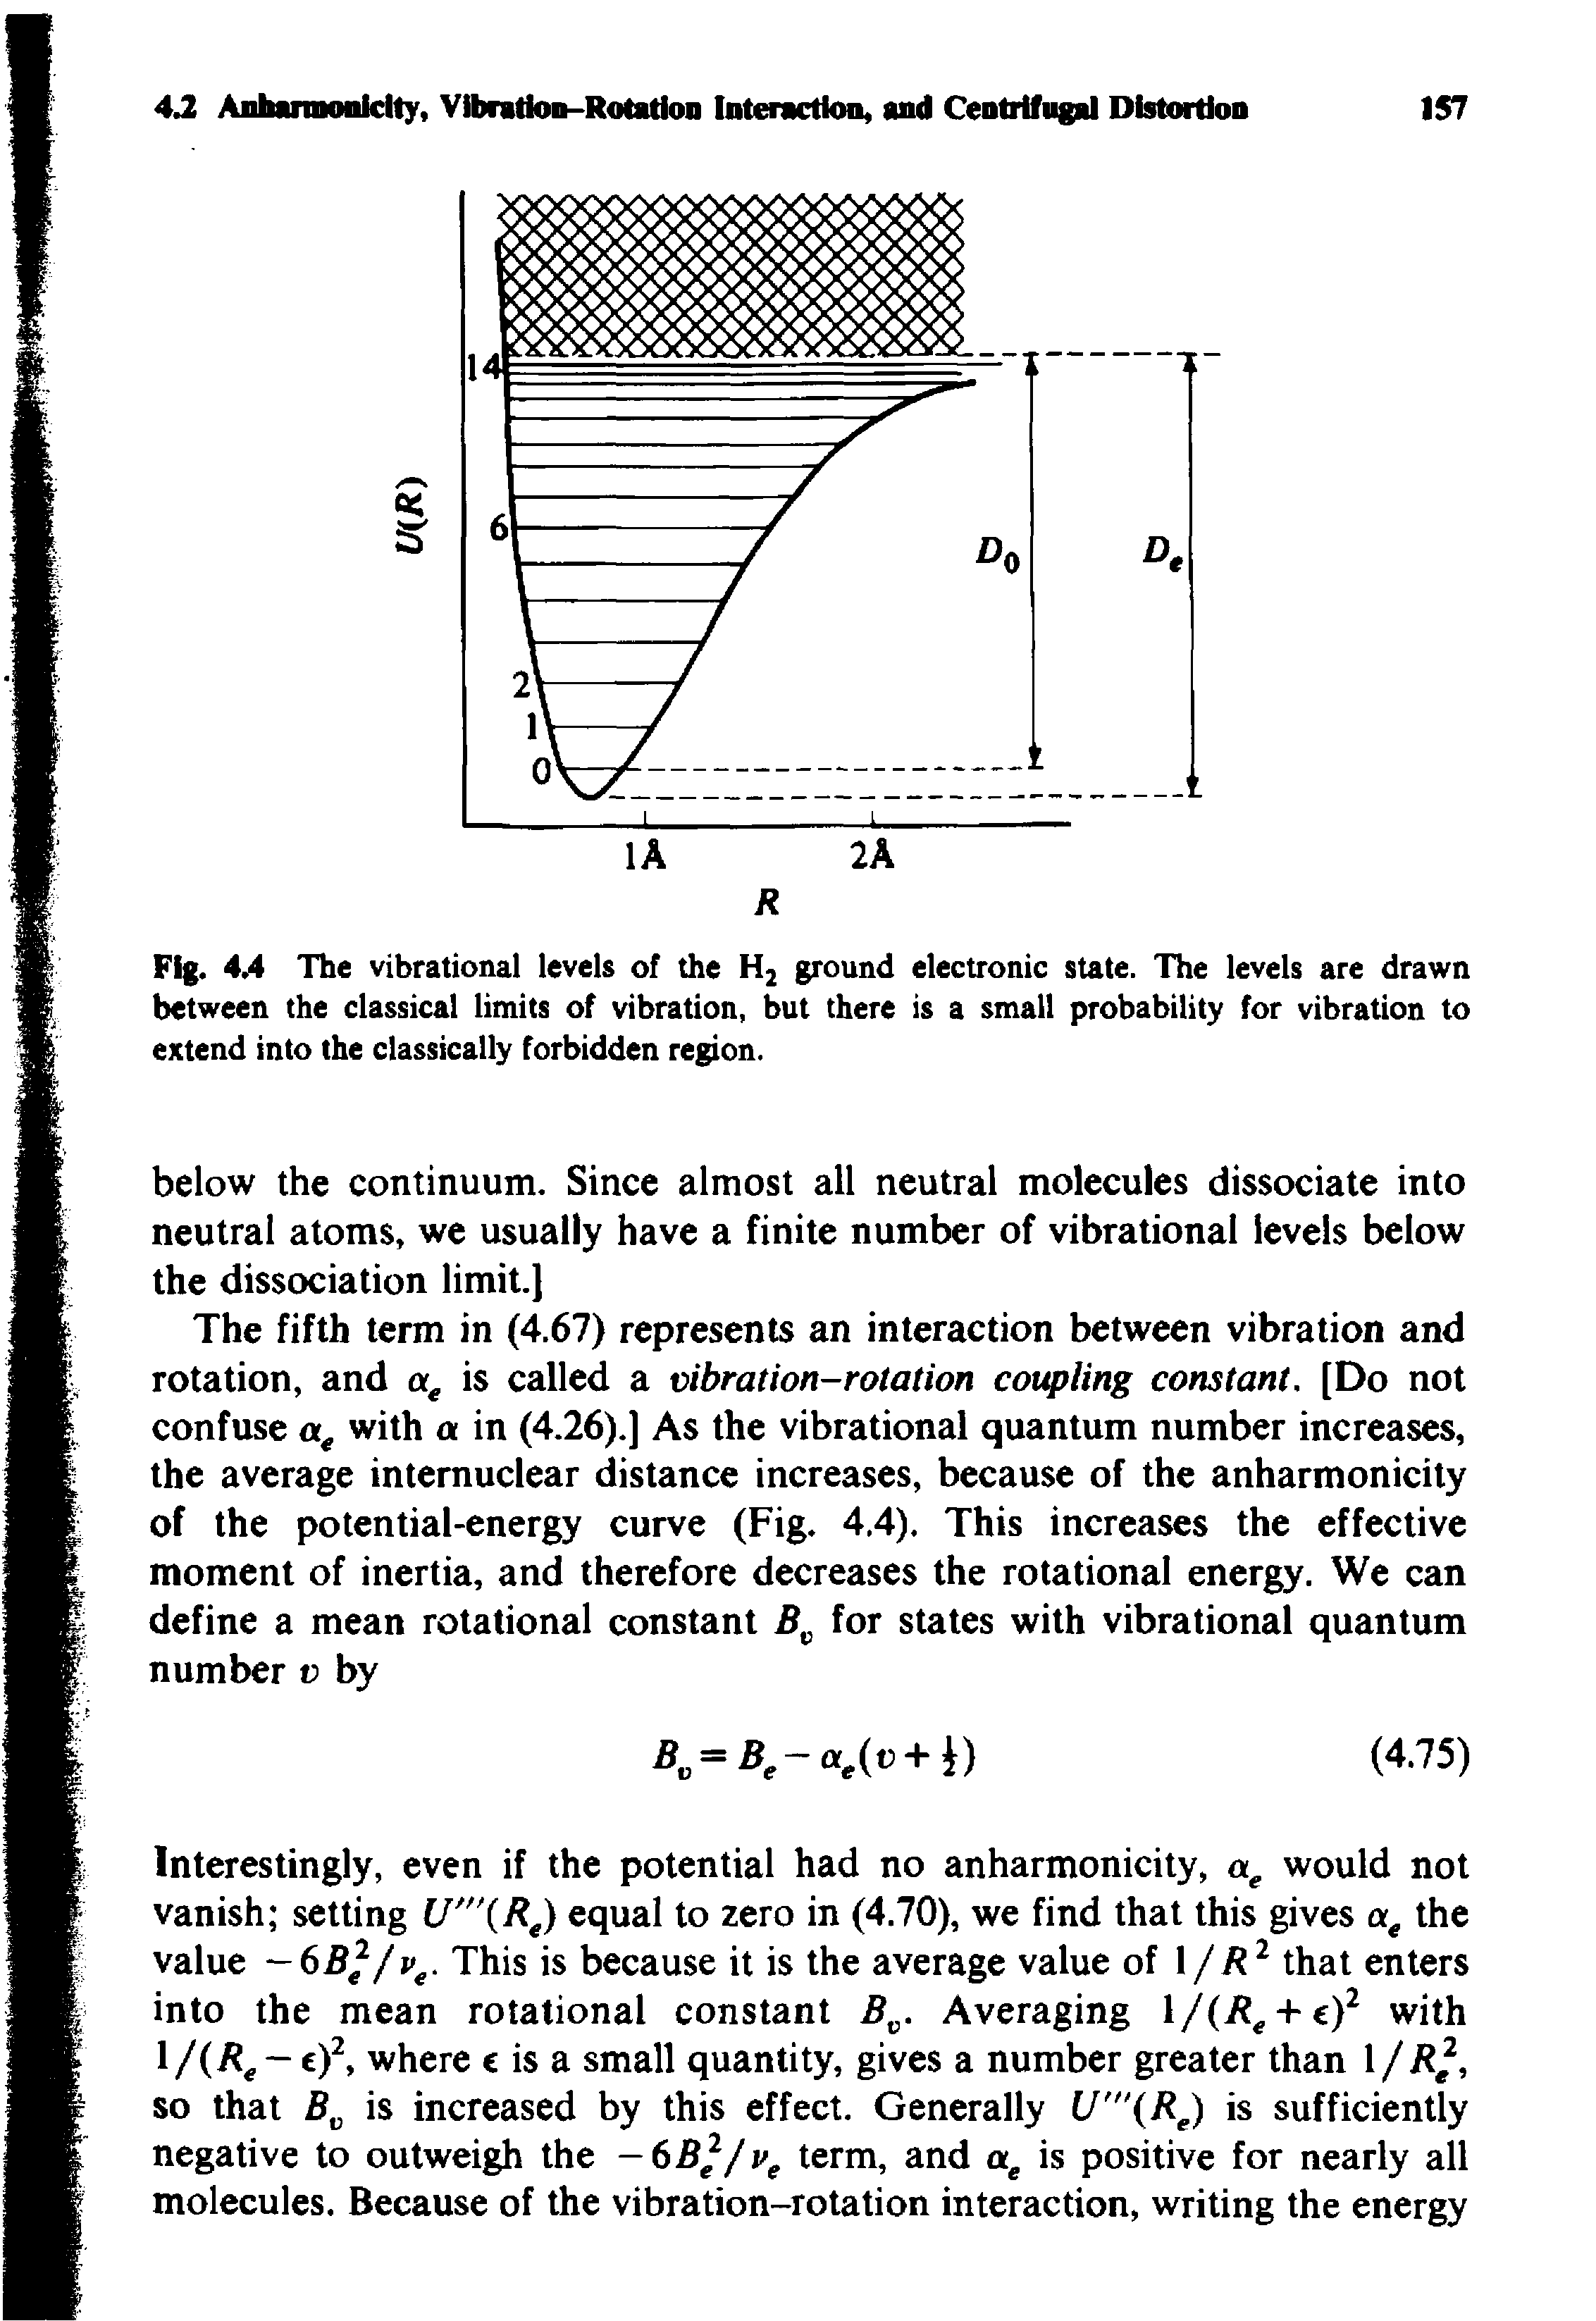 Fig. 4A The vibrational levels of the H2 ground electronic state. The levels are drawn between the classical limits of vibration, but there is a small probability for vibration to extend into the classically forbidden region.